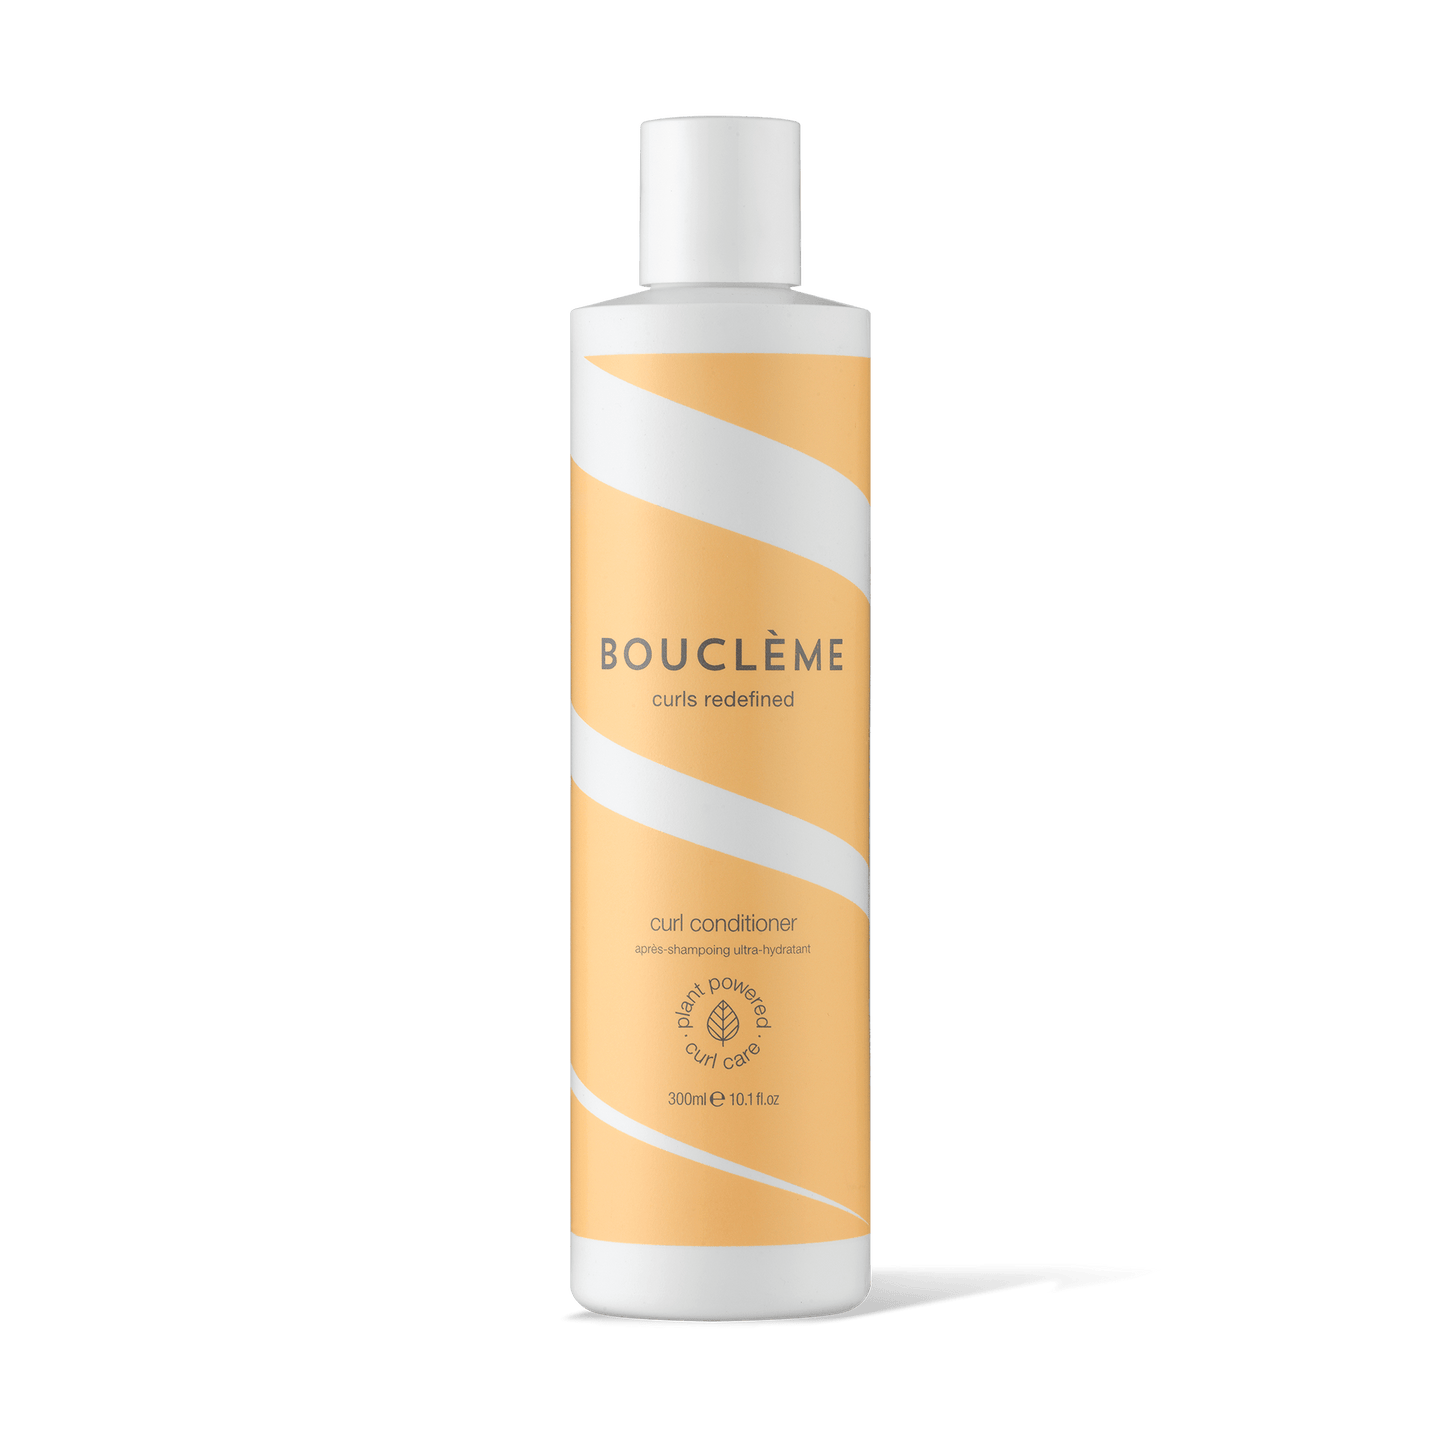 Created to quench curls, coils and waves its hydrating, lightweight formula softens strands, enhances definition and increases shine.